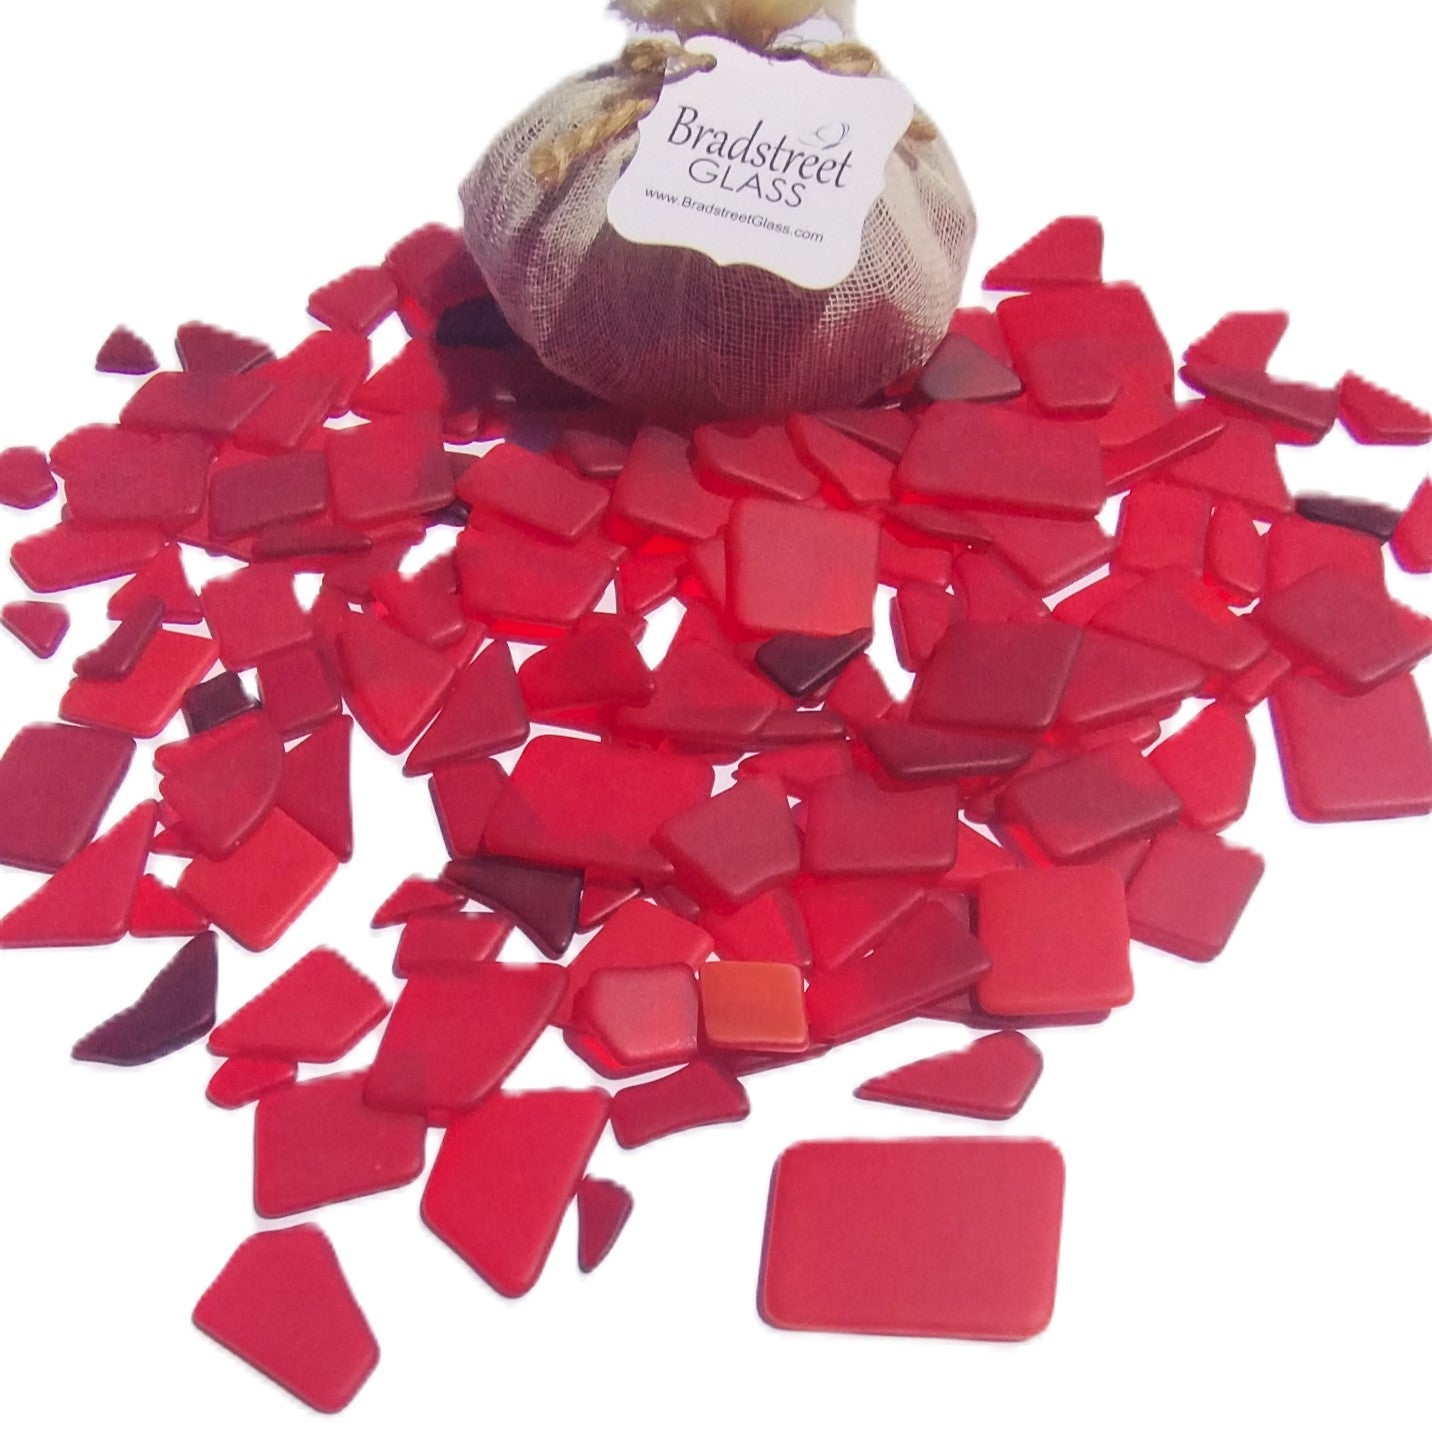 Bradstreet Glass Red Tumbled Stained Glass 1/2 pound "Sea Glass" in Shades of Red